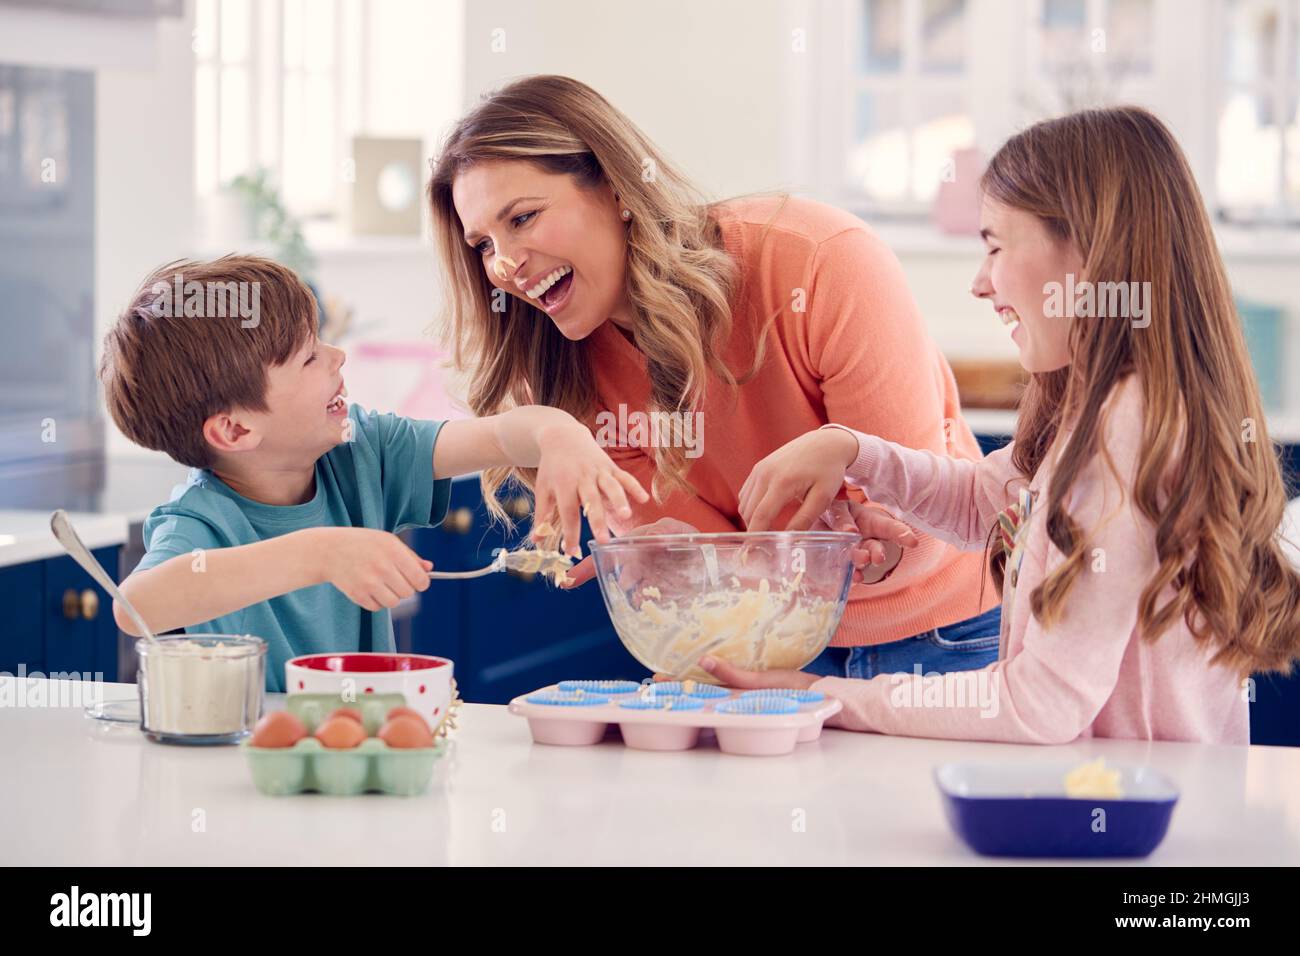 Children Putting Cake Mixture On Mother's Nose In Kitchen As They Have Fun Baking Cakes Together Stock Photo